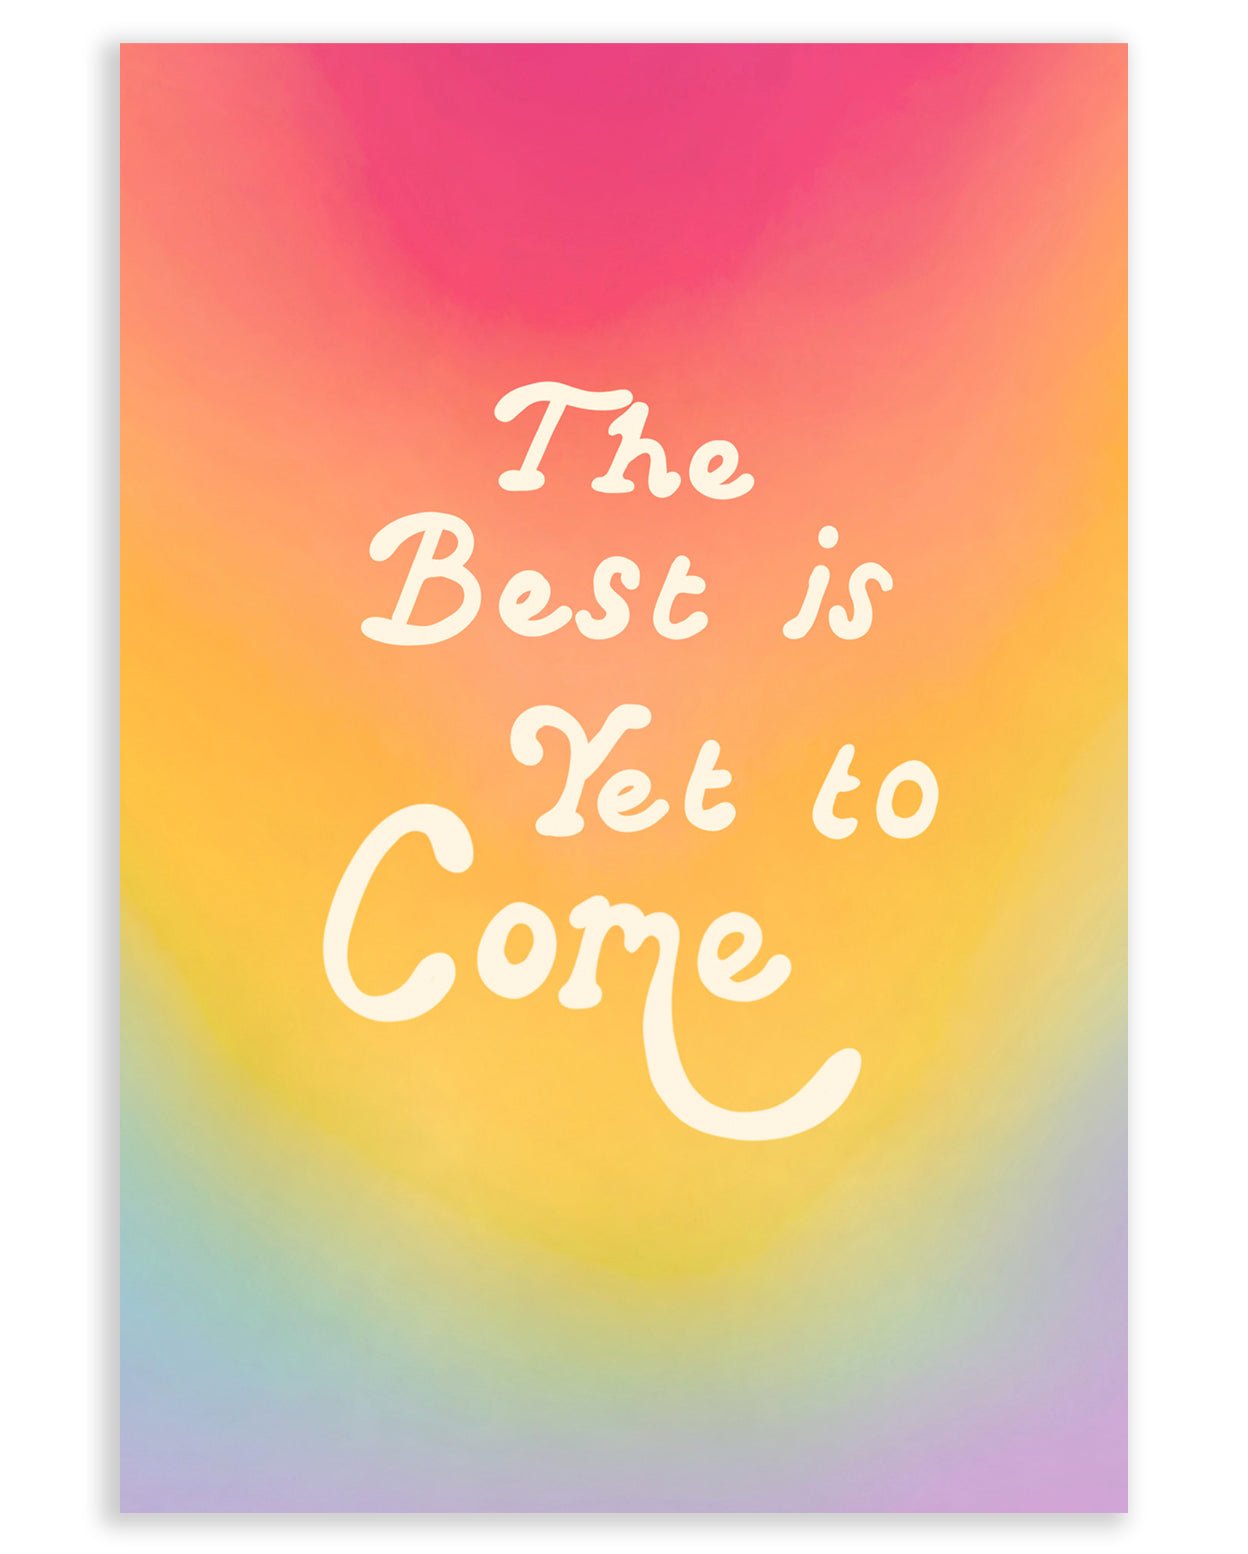 Rainbow gradient background with center-aligned bold text &quot;The Best is Yet to Come.&quot;